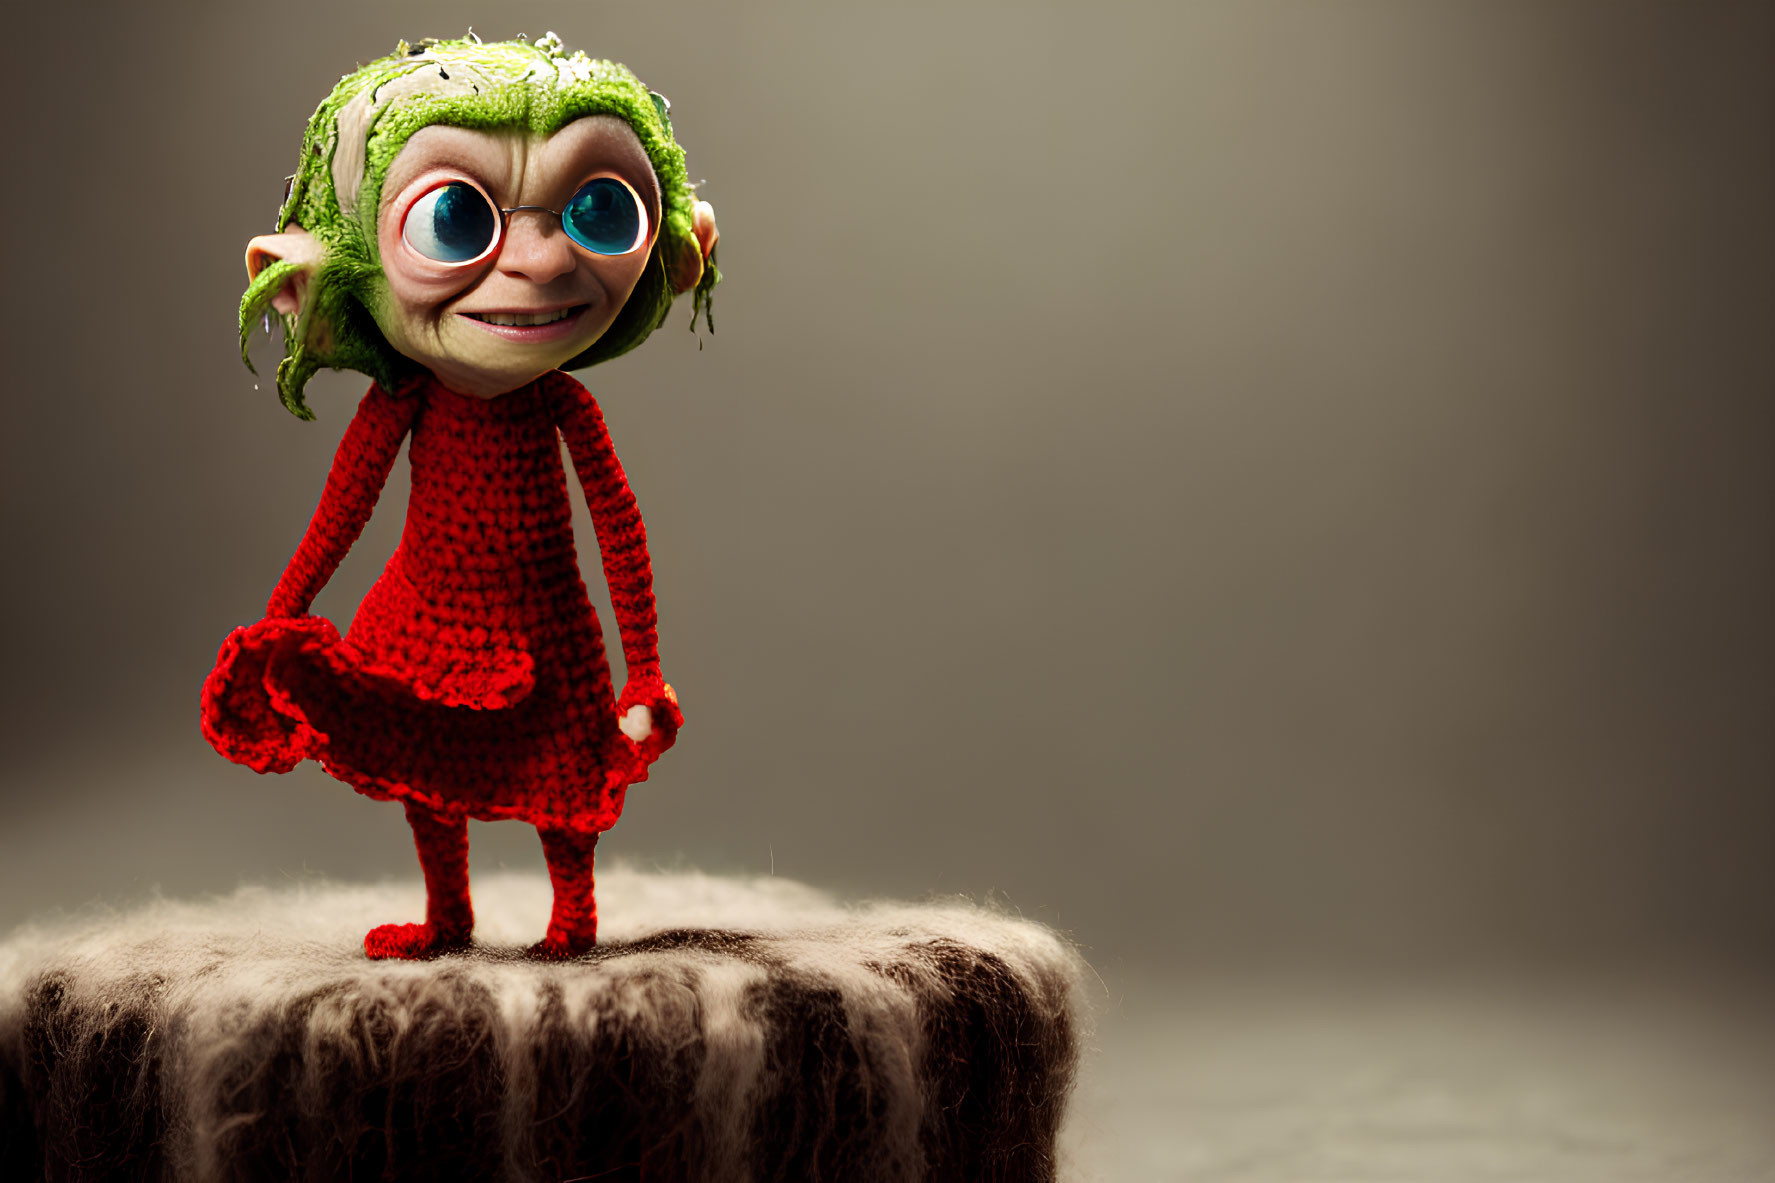 Green-skinned animated character in red dress on fluffy surface